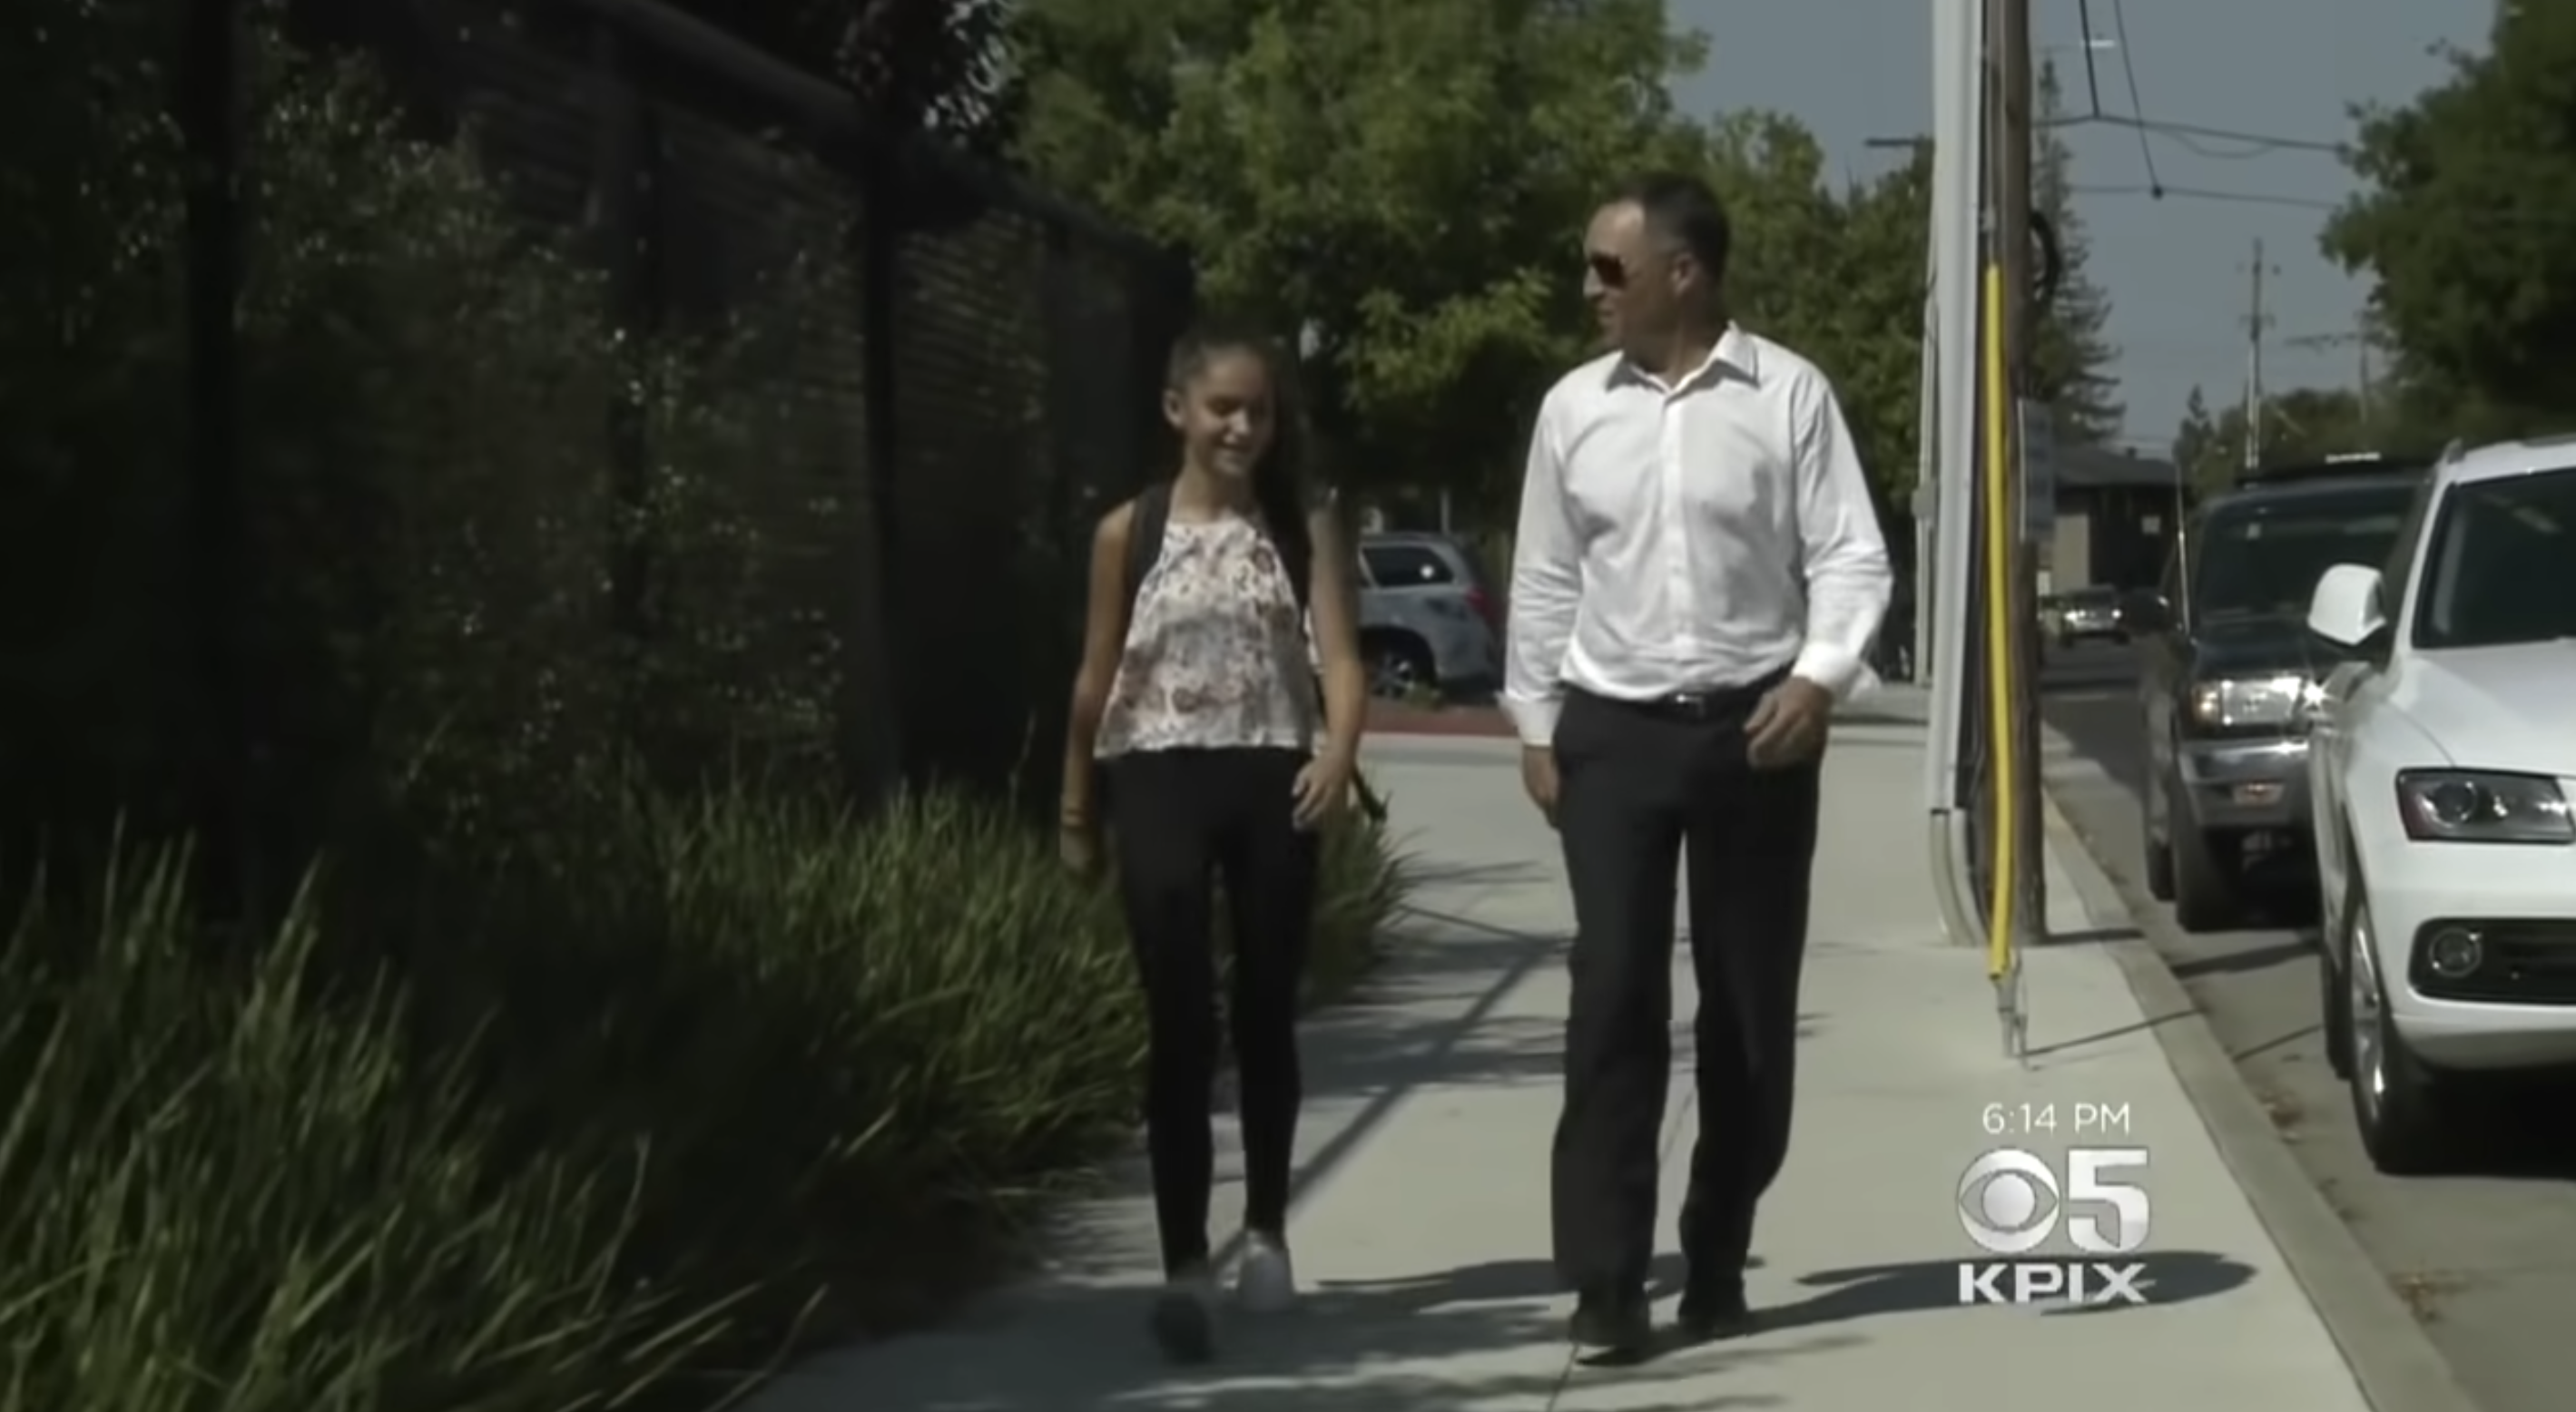 Demetra Alarcon, 13, walking to school with her dad, Tony Alarcon, as seen in a video dated September 13, 2017 | Source: youtube.com/cbssf